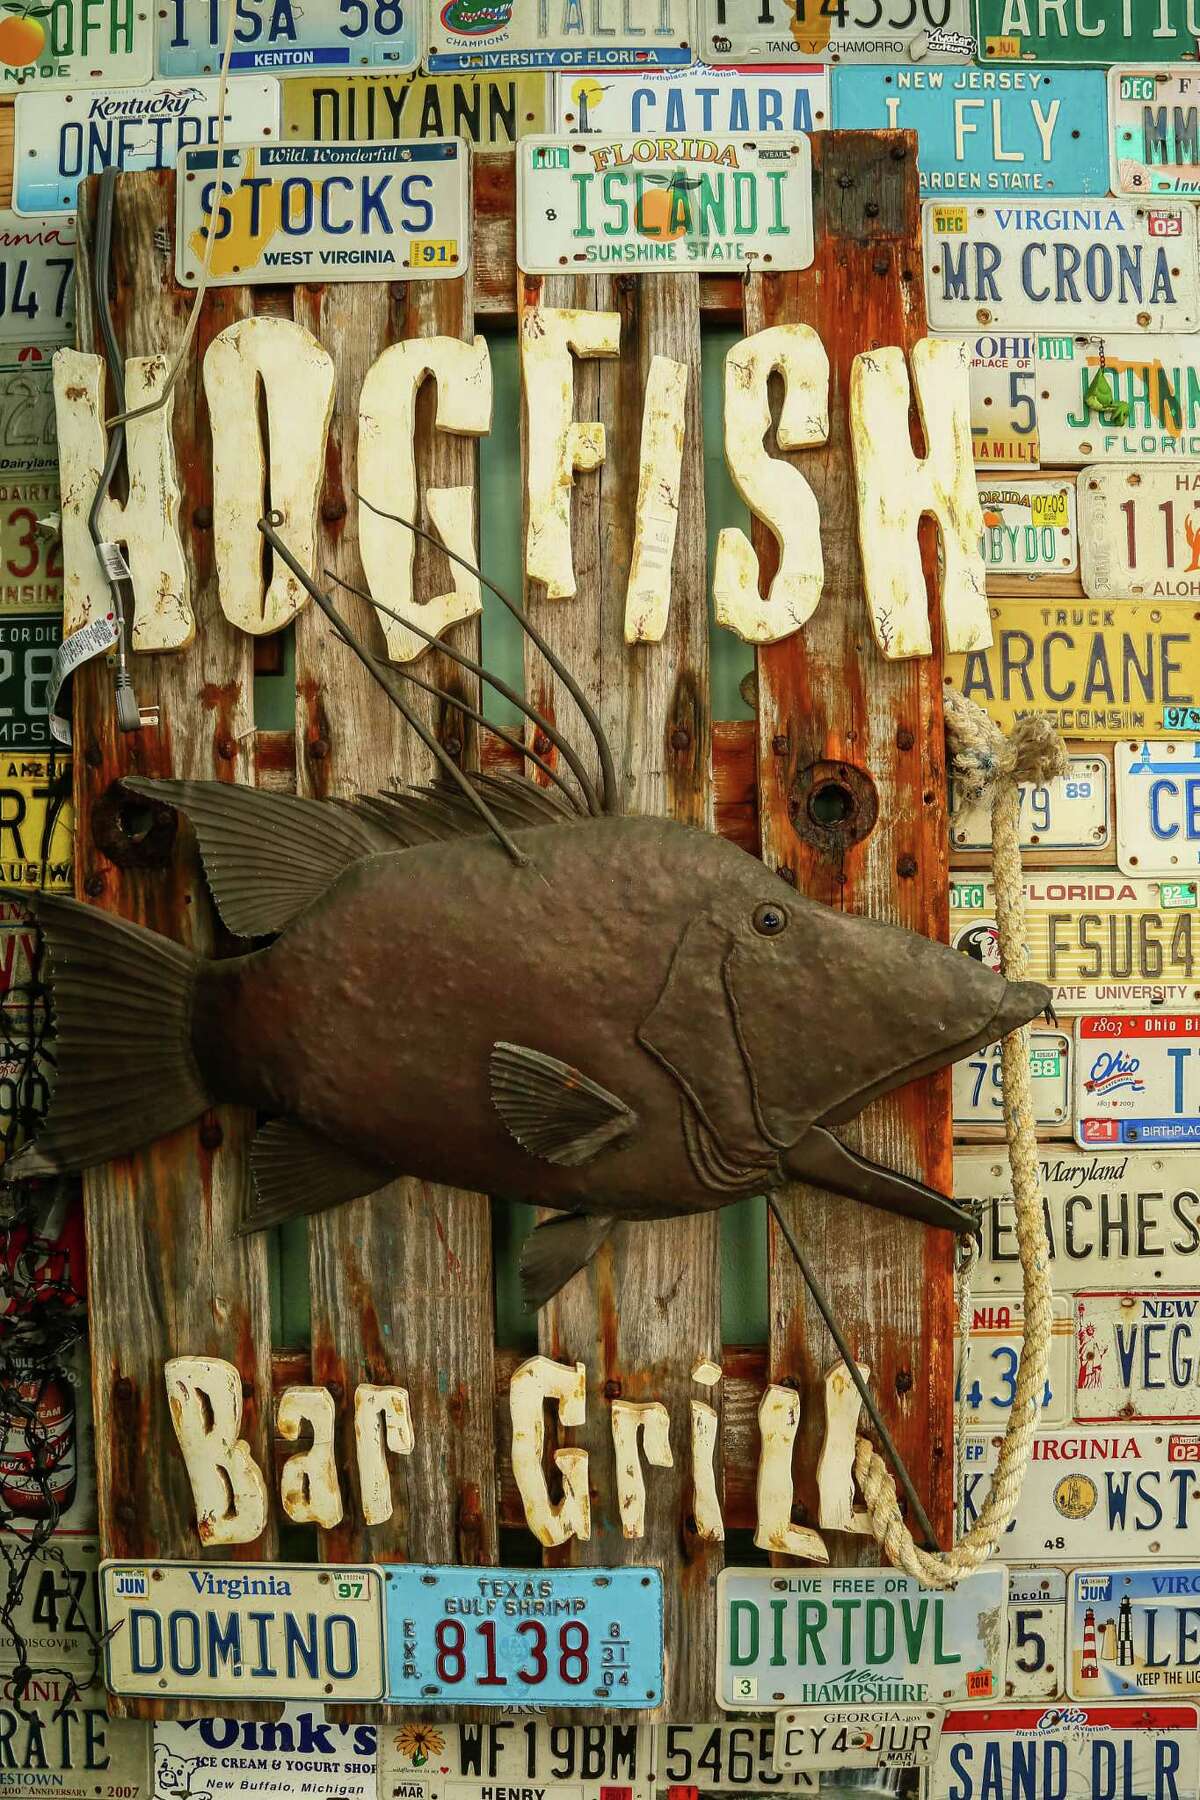 Stock Island, at the upper end of Key West, is one of the last remaining deep-water ports on the Eastern seaboard and home to the Hogfish Bar &Grill, a funky outpost that conjures up the Keys of yore.